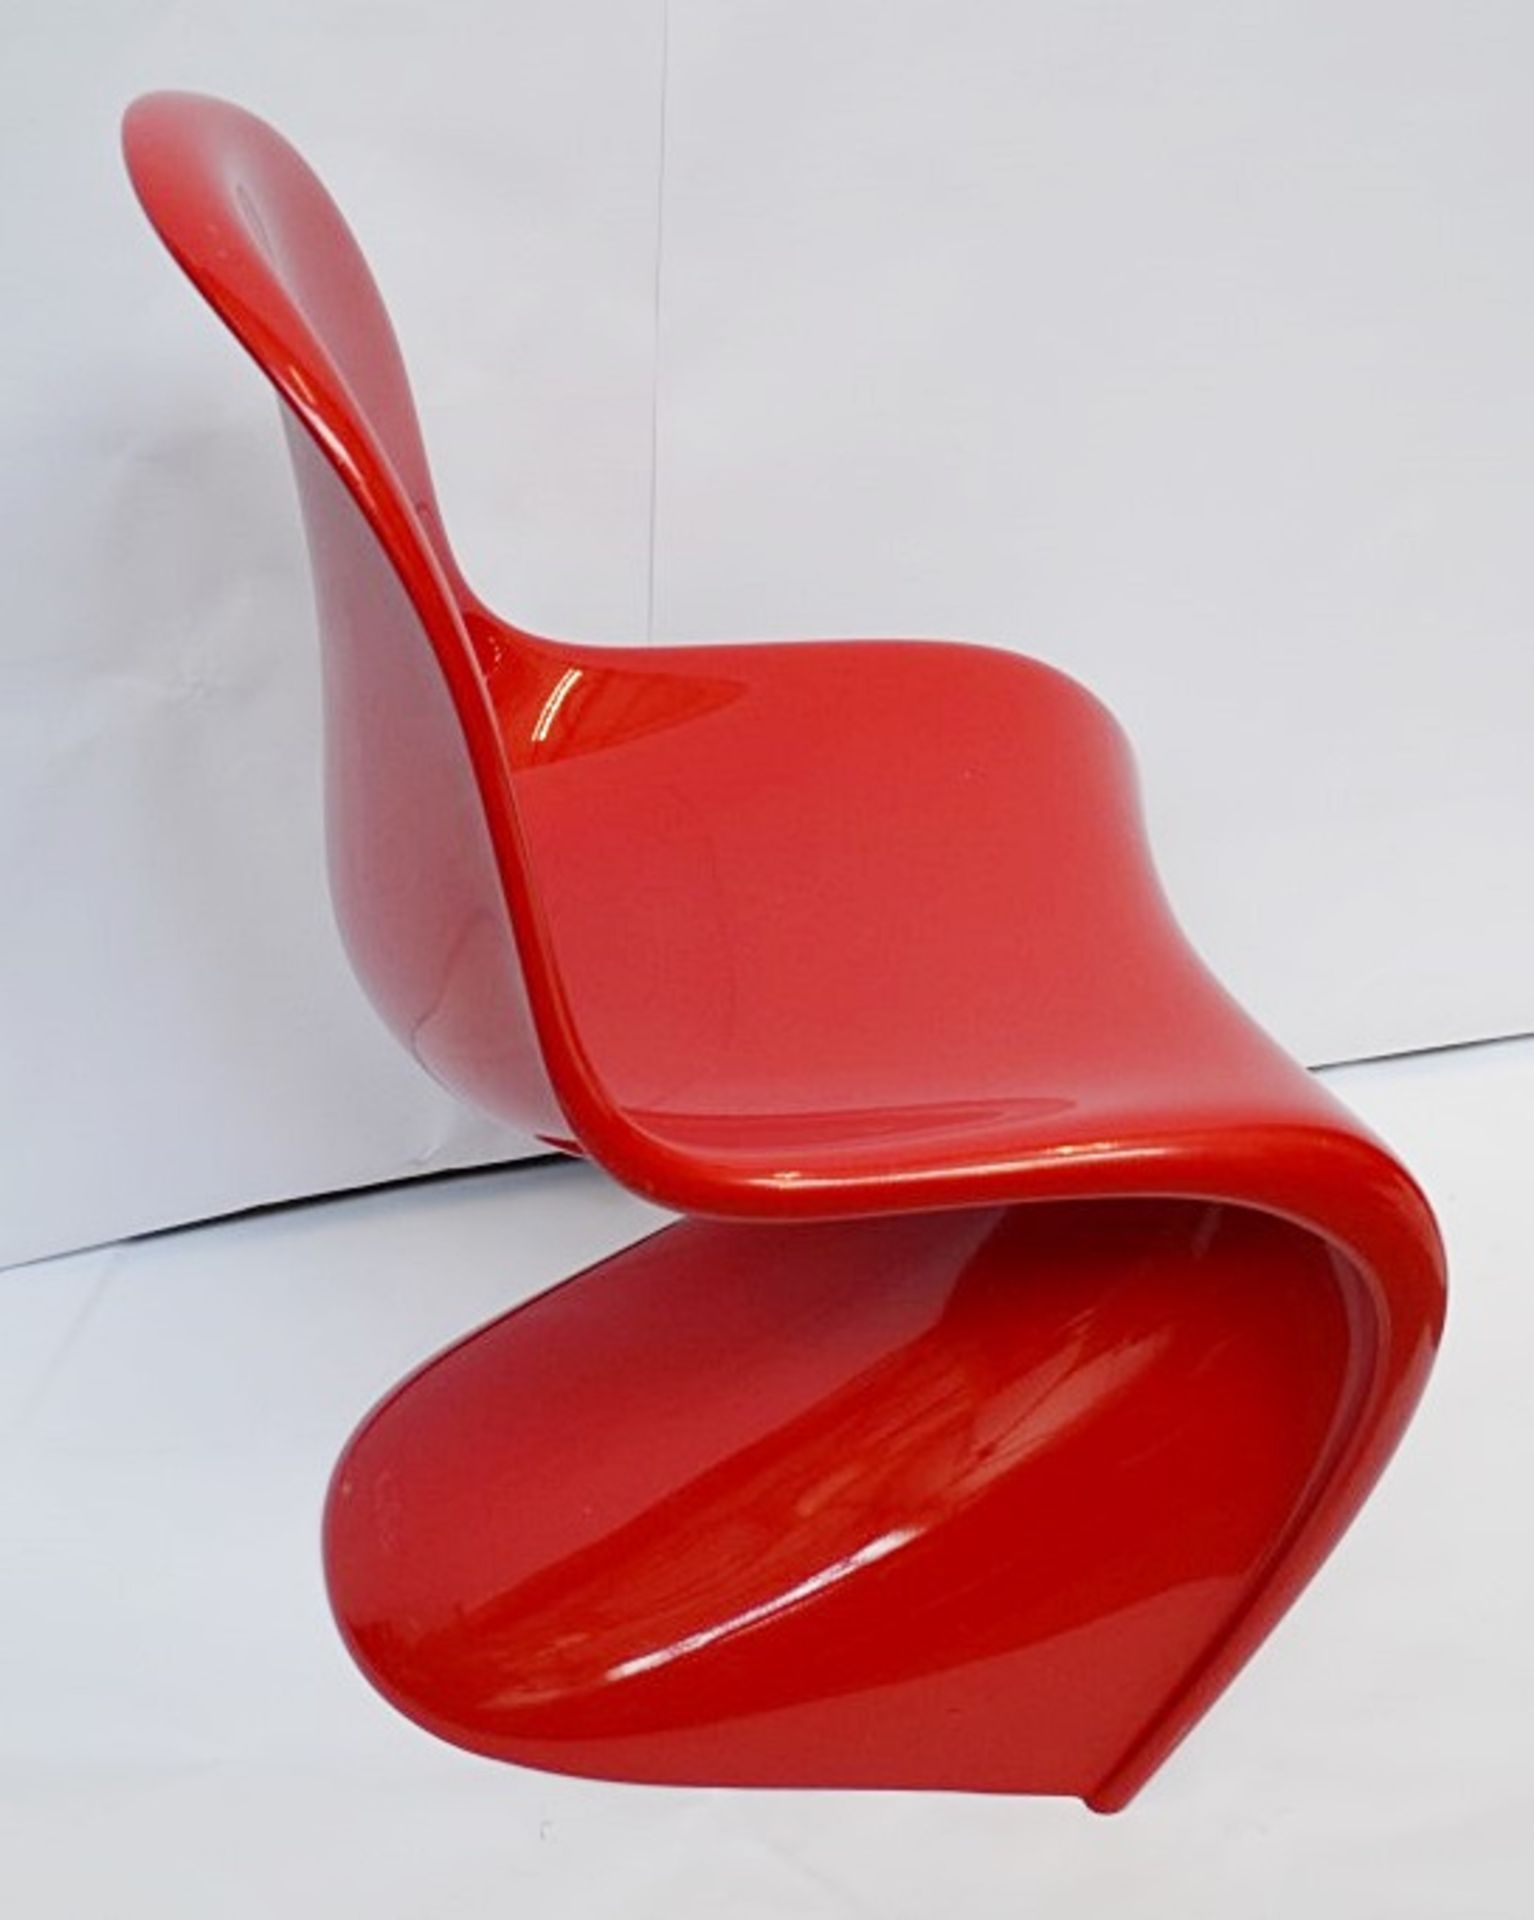 1 x VITRA Panton Chair In Classic Red - Measurements: W50 x D60 x H83cm, Seat Height: 41cm - - Image 4 of 8